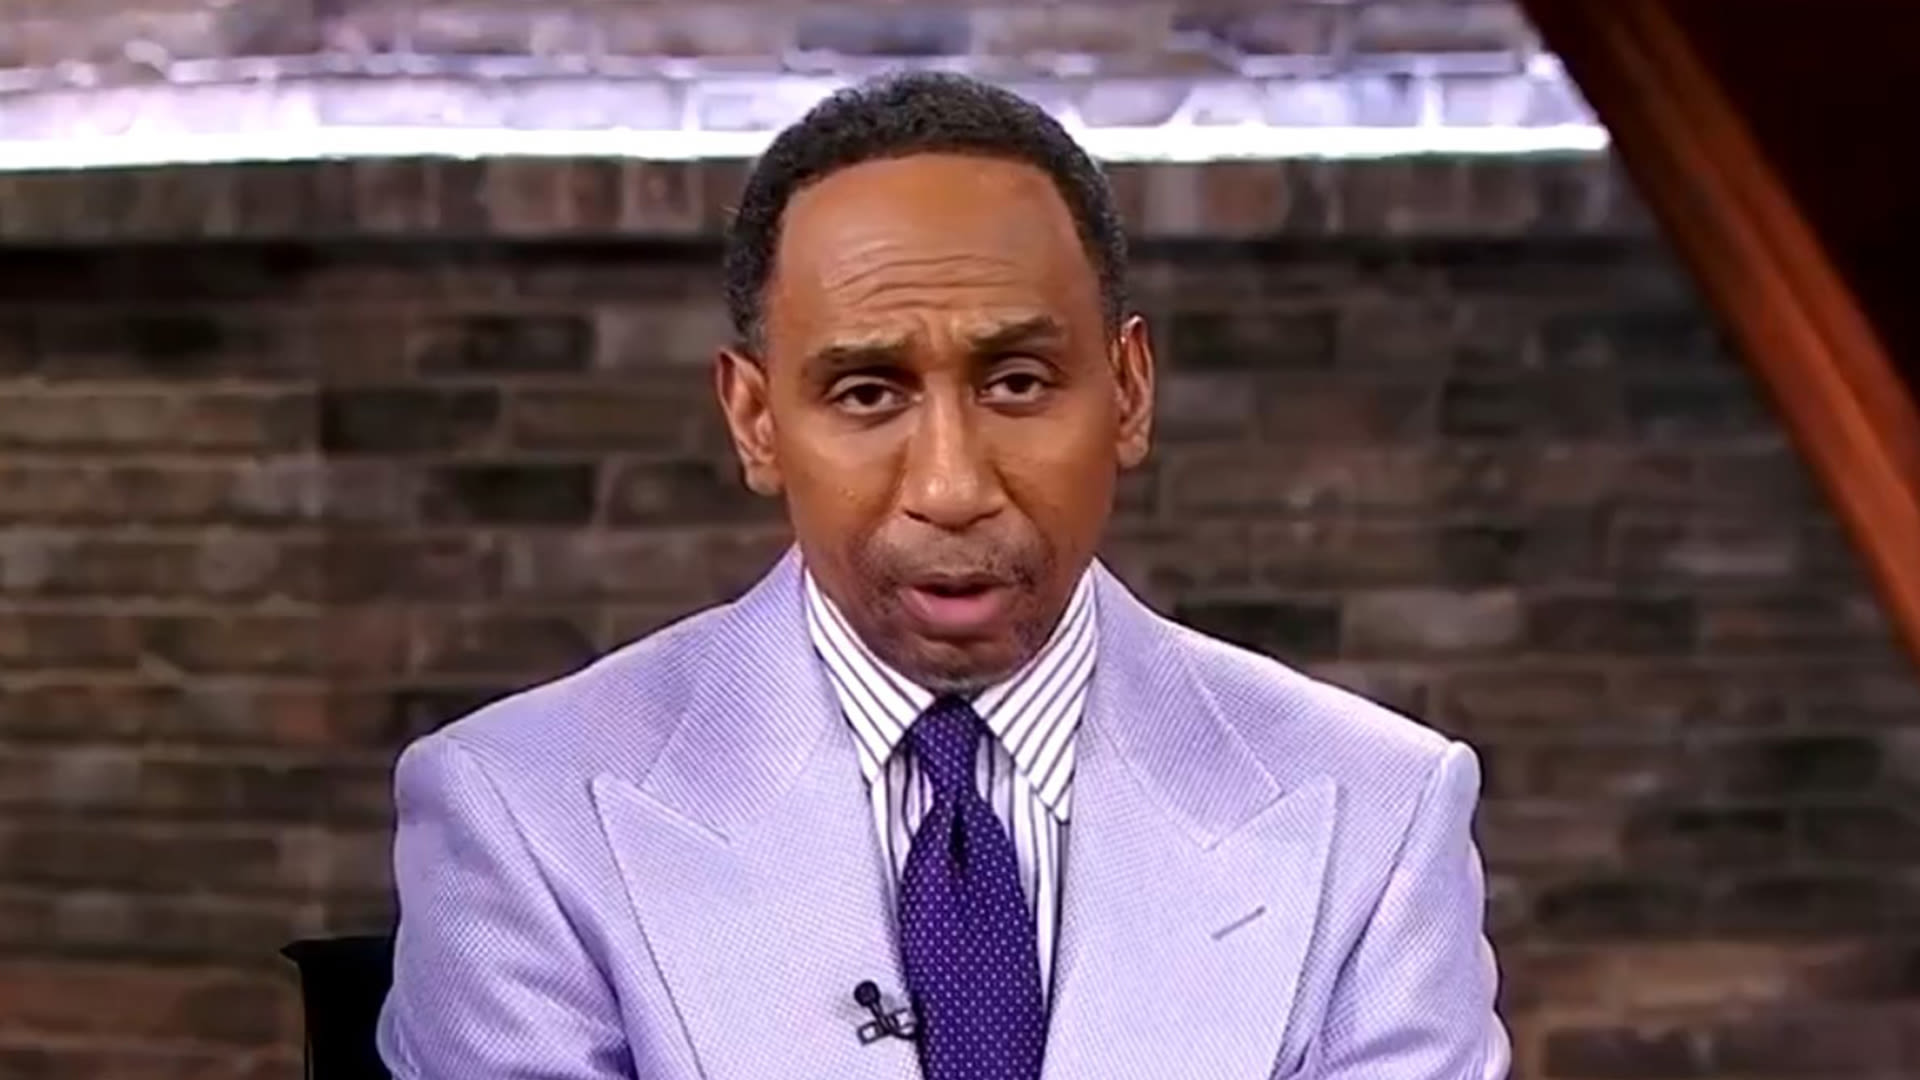 Stephen A. Smith rips into Knicks on live TV after 'positively awful' first half